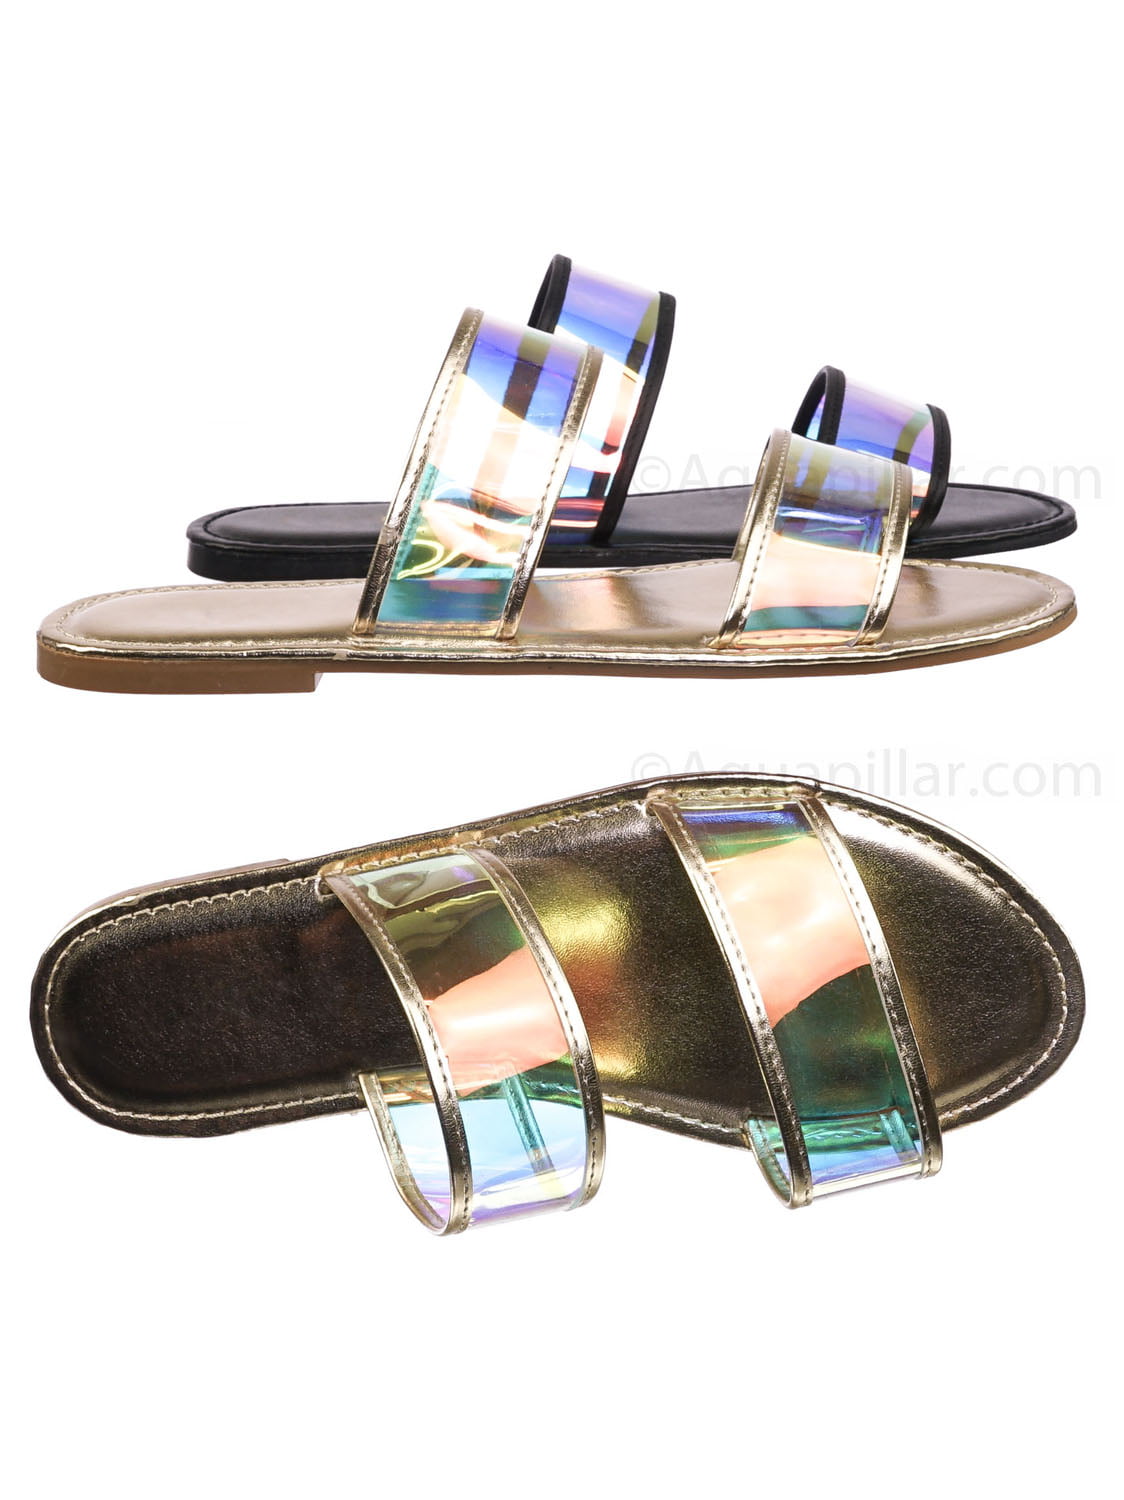 holographic clear sandals